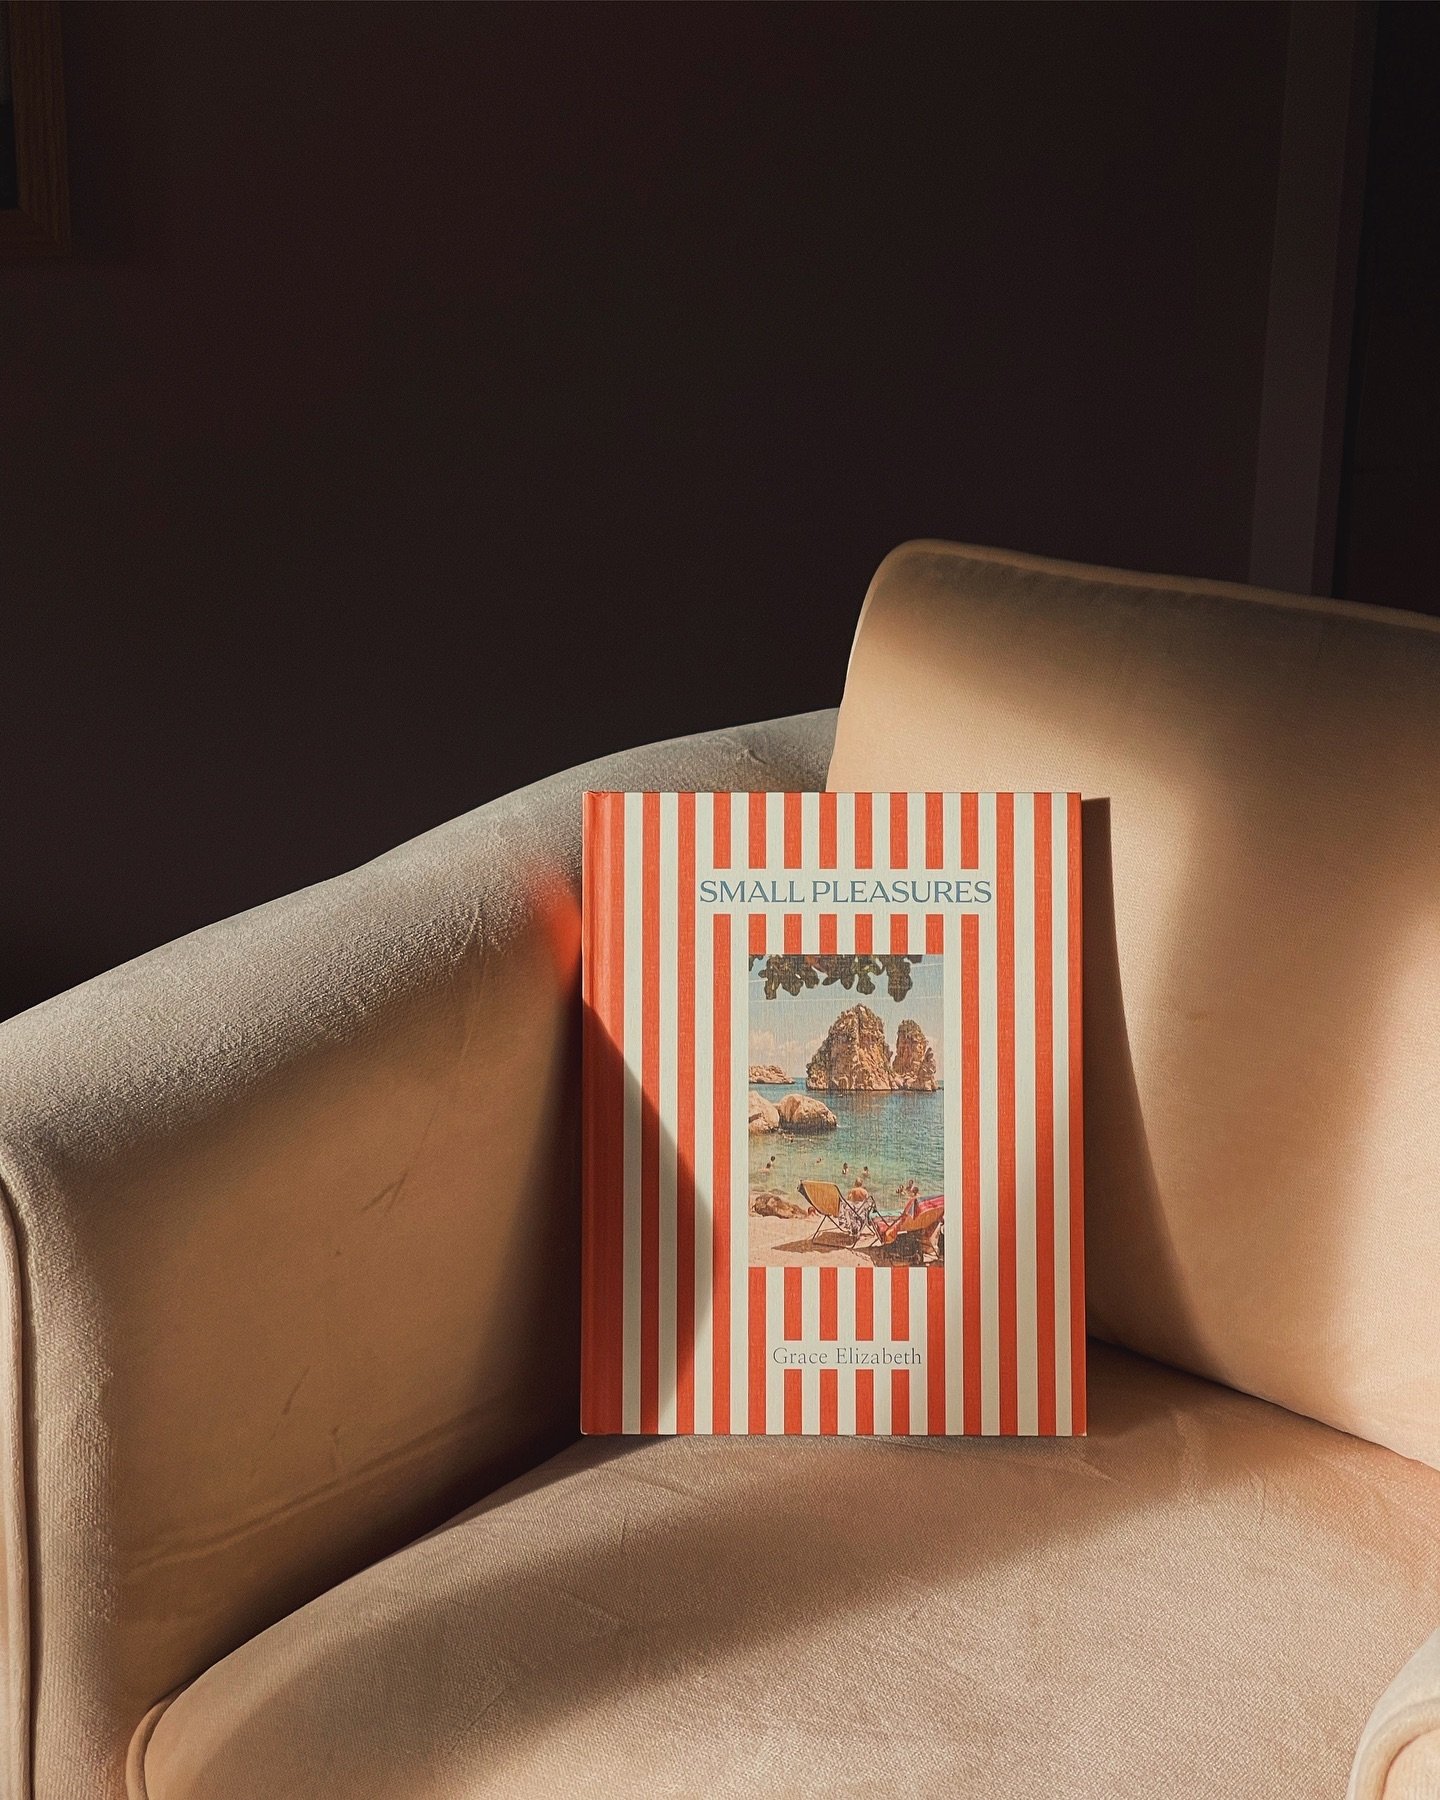 Pull up a chair sweet things and dive deep into Southern Italy 🇮🇹 If you were in need of some travel inspiration, Small Pleasures is the perfect new travel companion 🧳